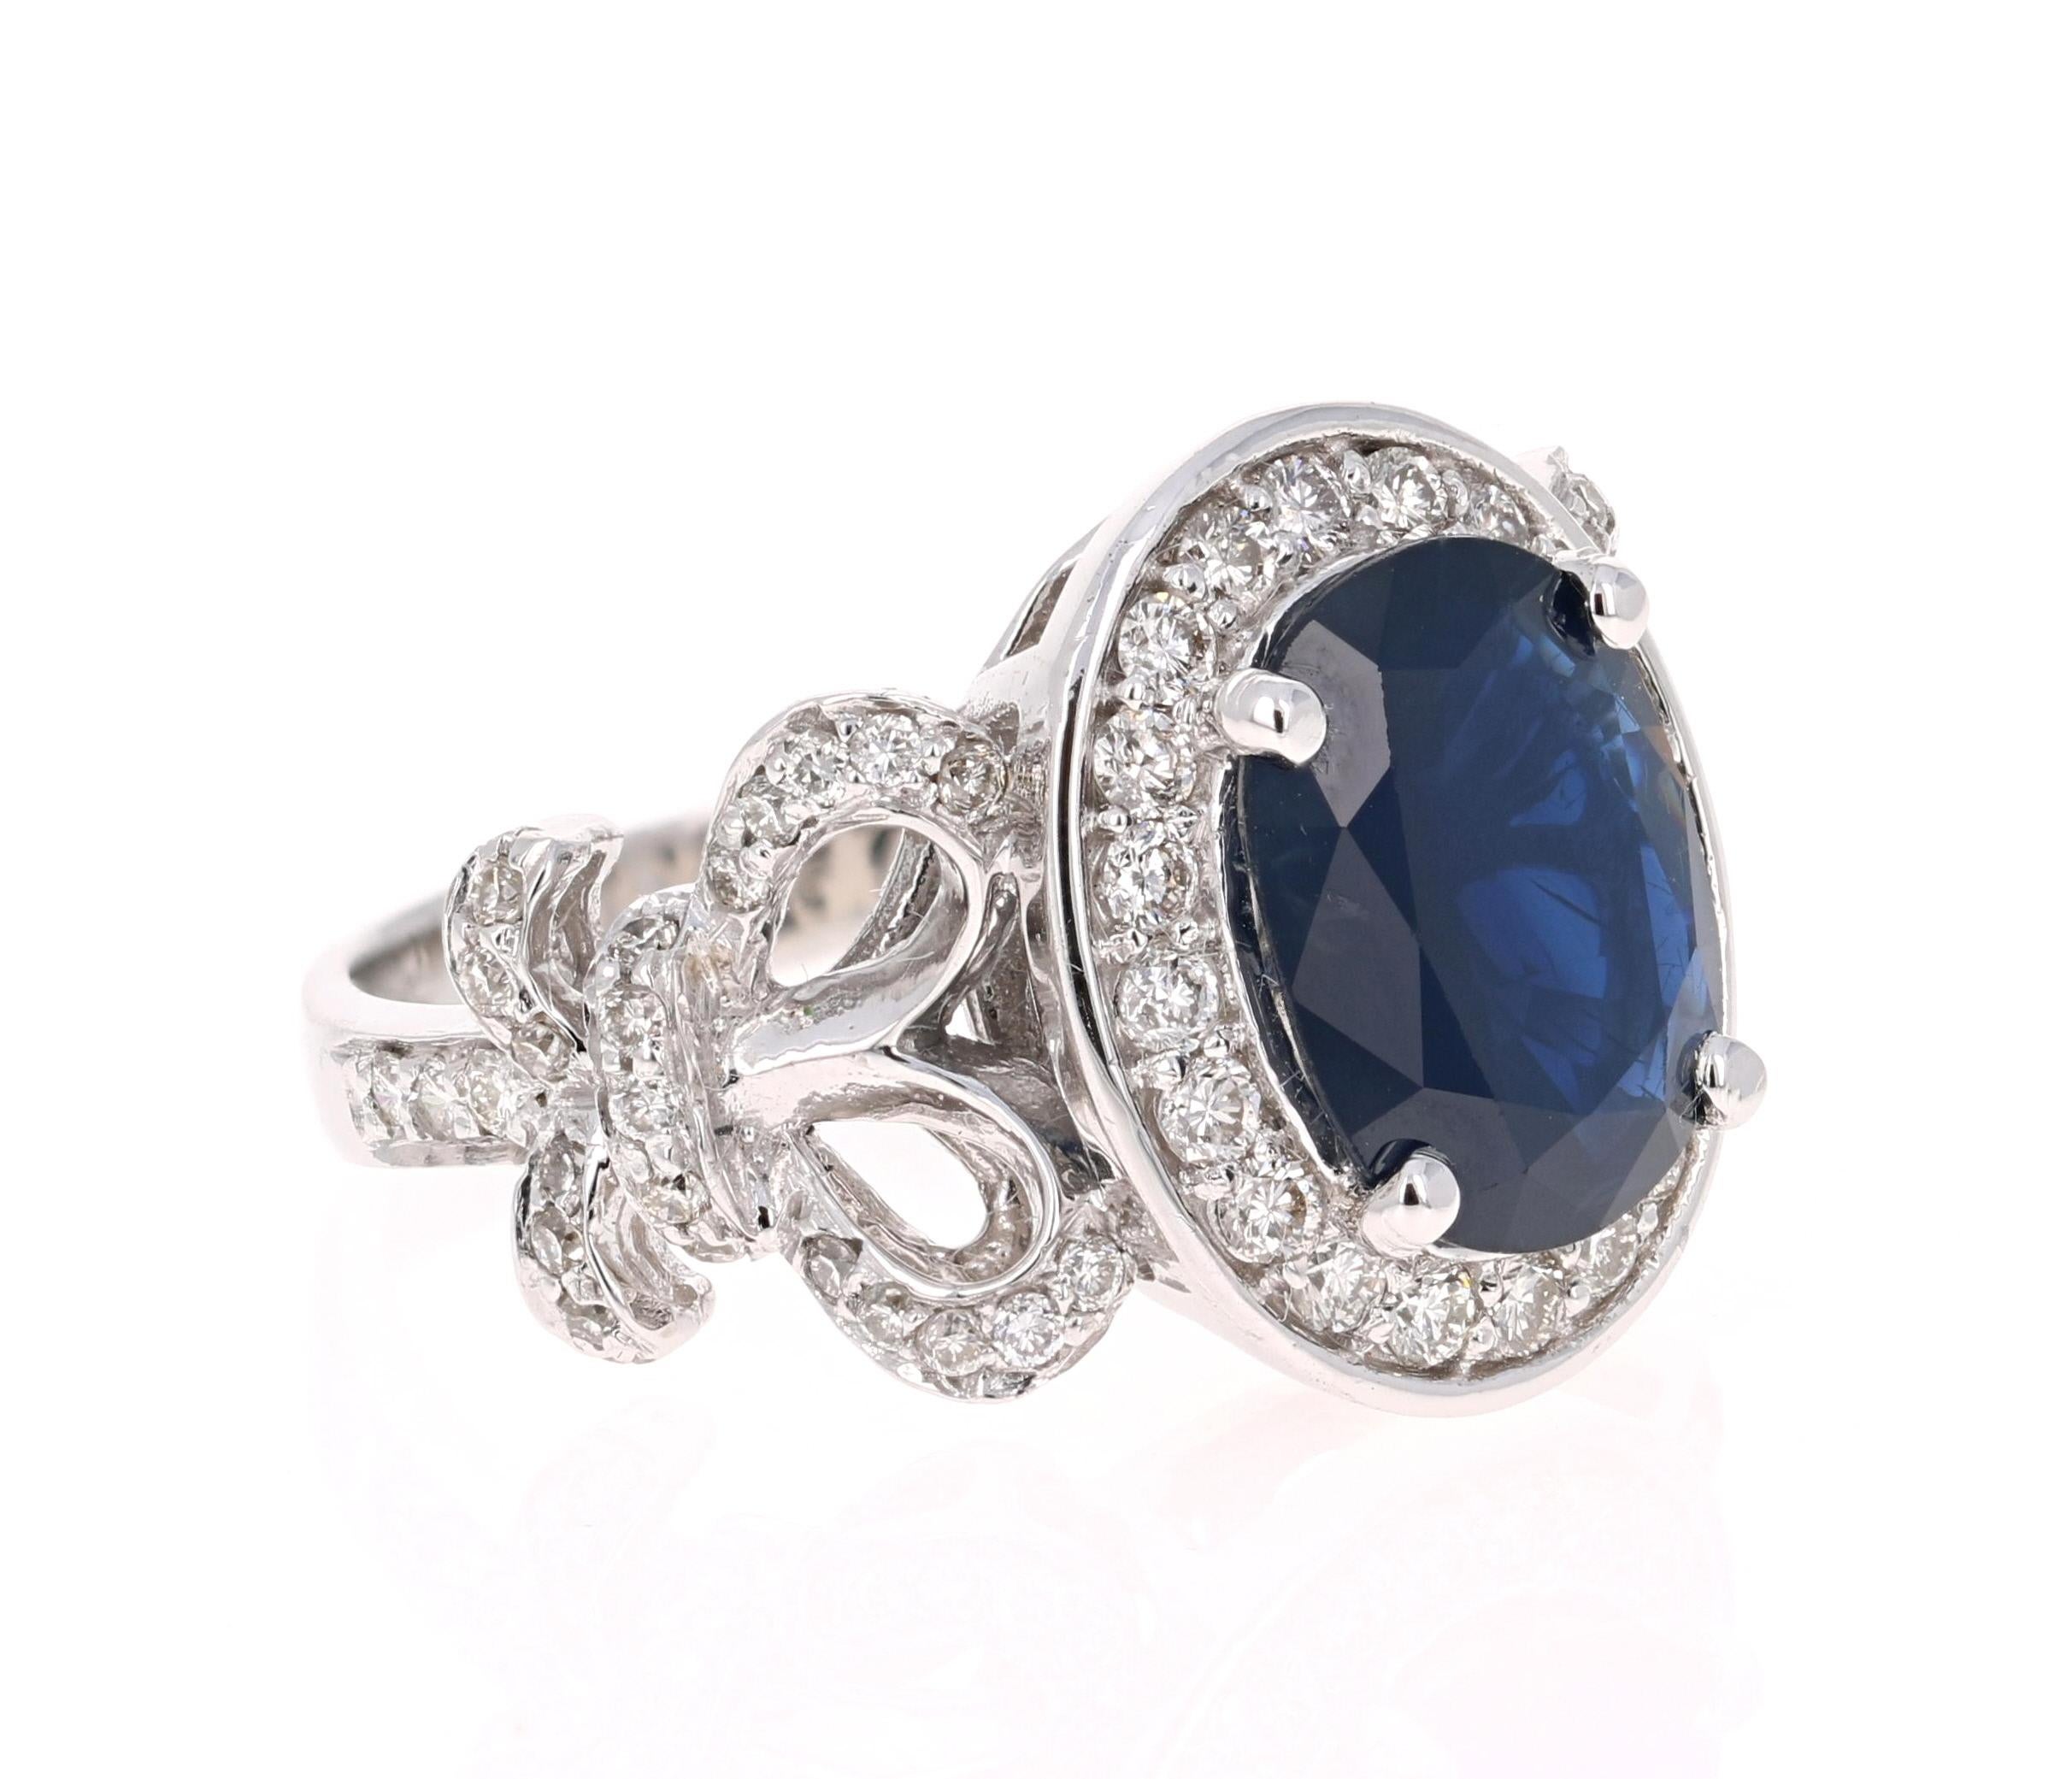 This dark blue sapphire ring has a Oval Cut 3.59 Carat Blue Sapphire and is surrounded by 68 Round Cut Diamonds that weigh 0.94 Carats. The diamonds are VS-H in clarity and color. The total carat weight of the ring is 4.53 Carats. The Sapphire is a